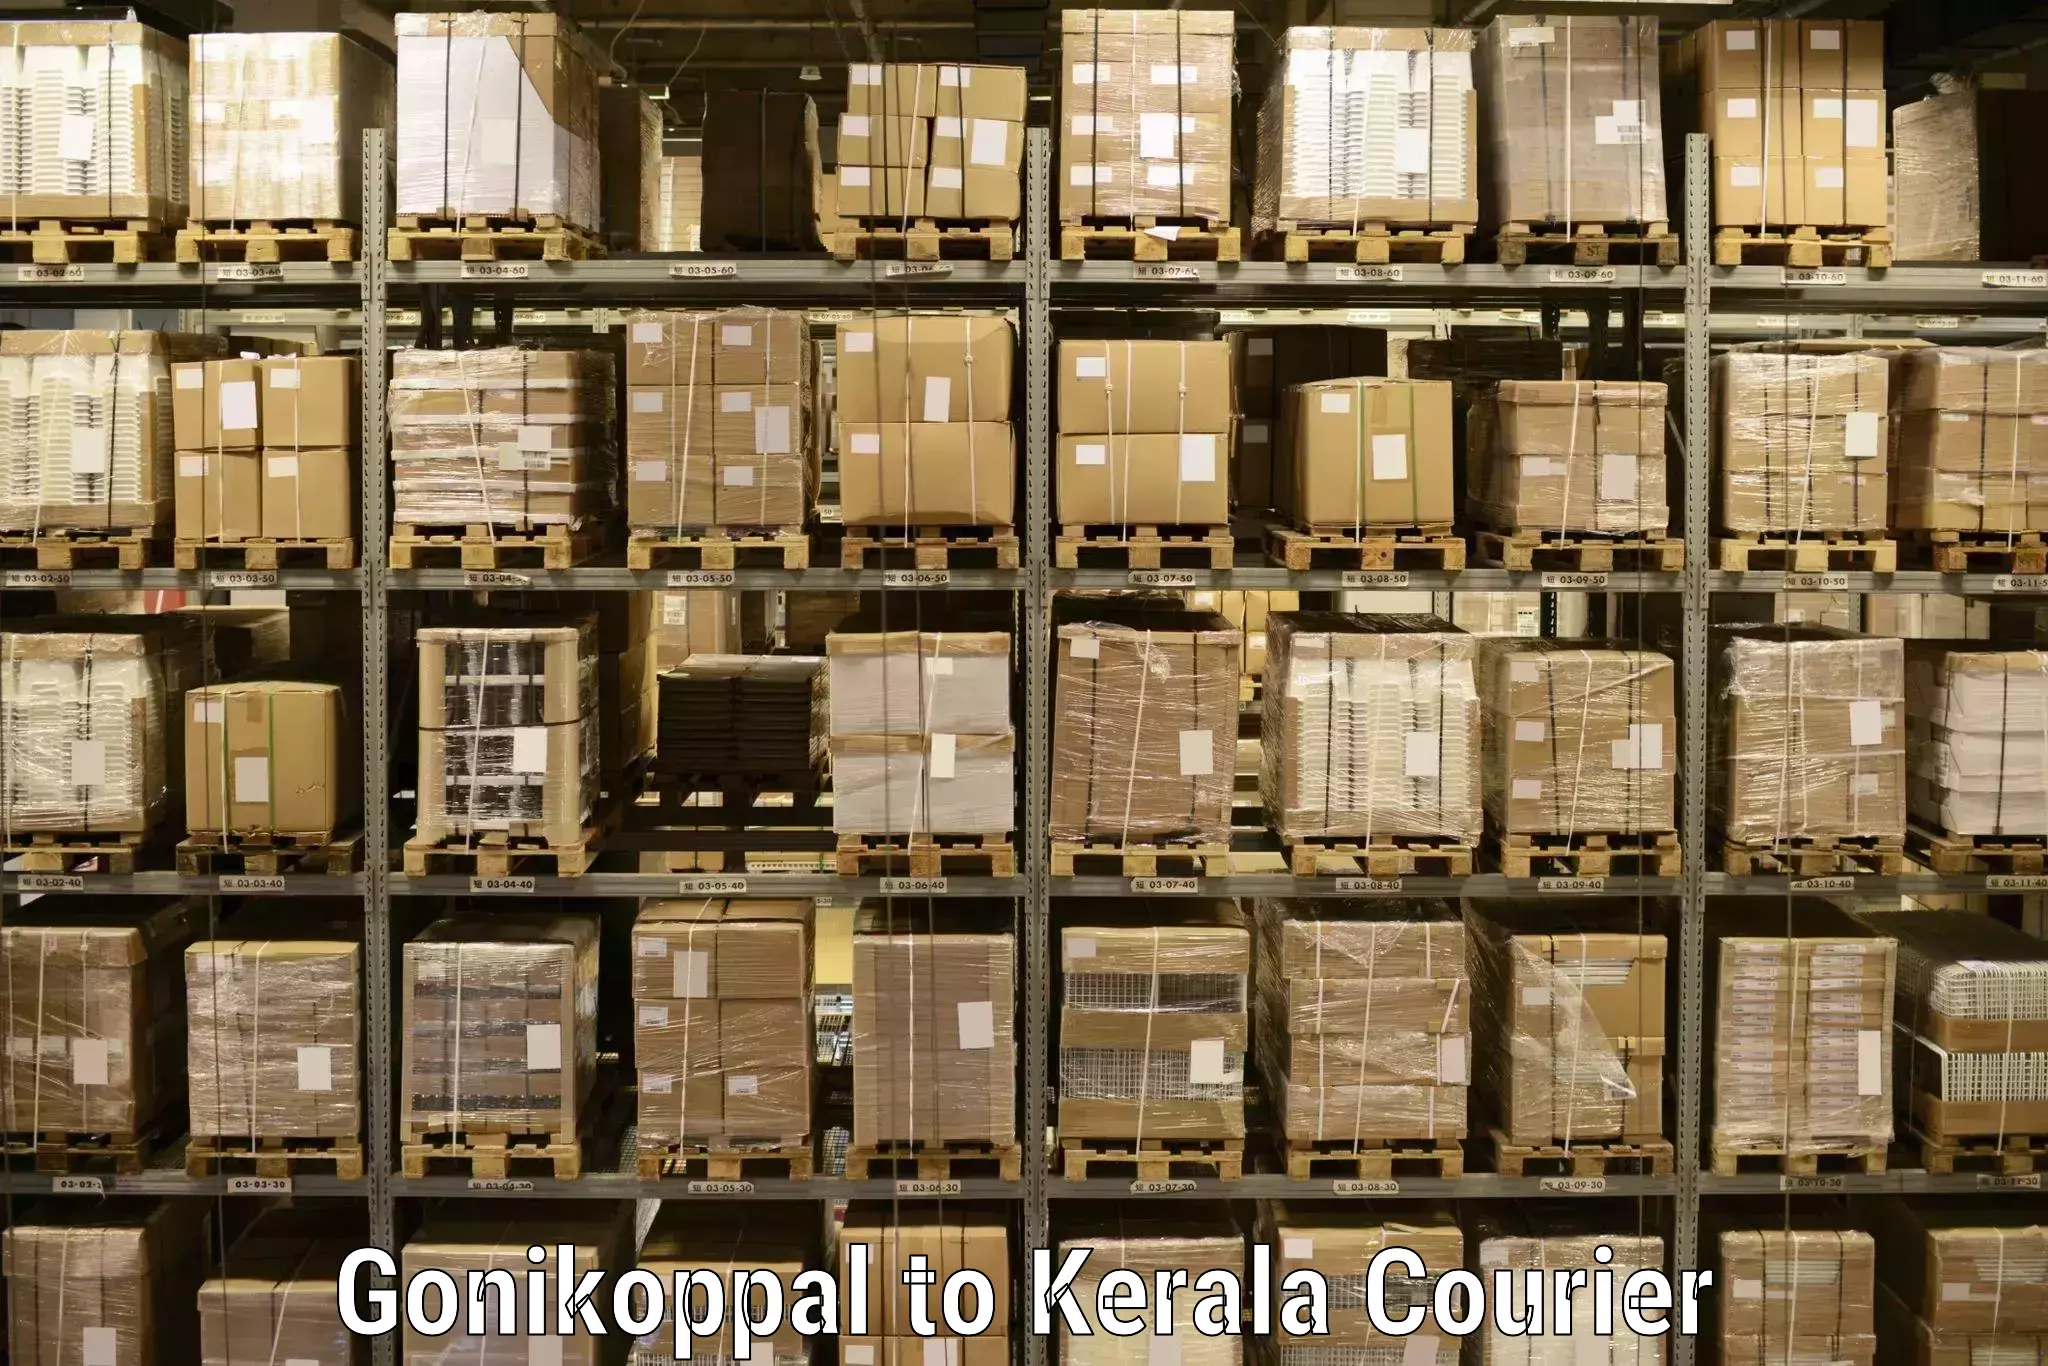 End-to-end delivery Gonikoppal to Calicut